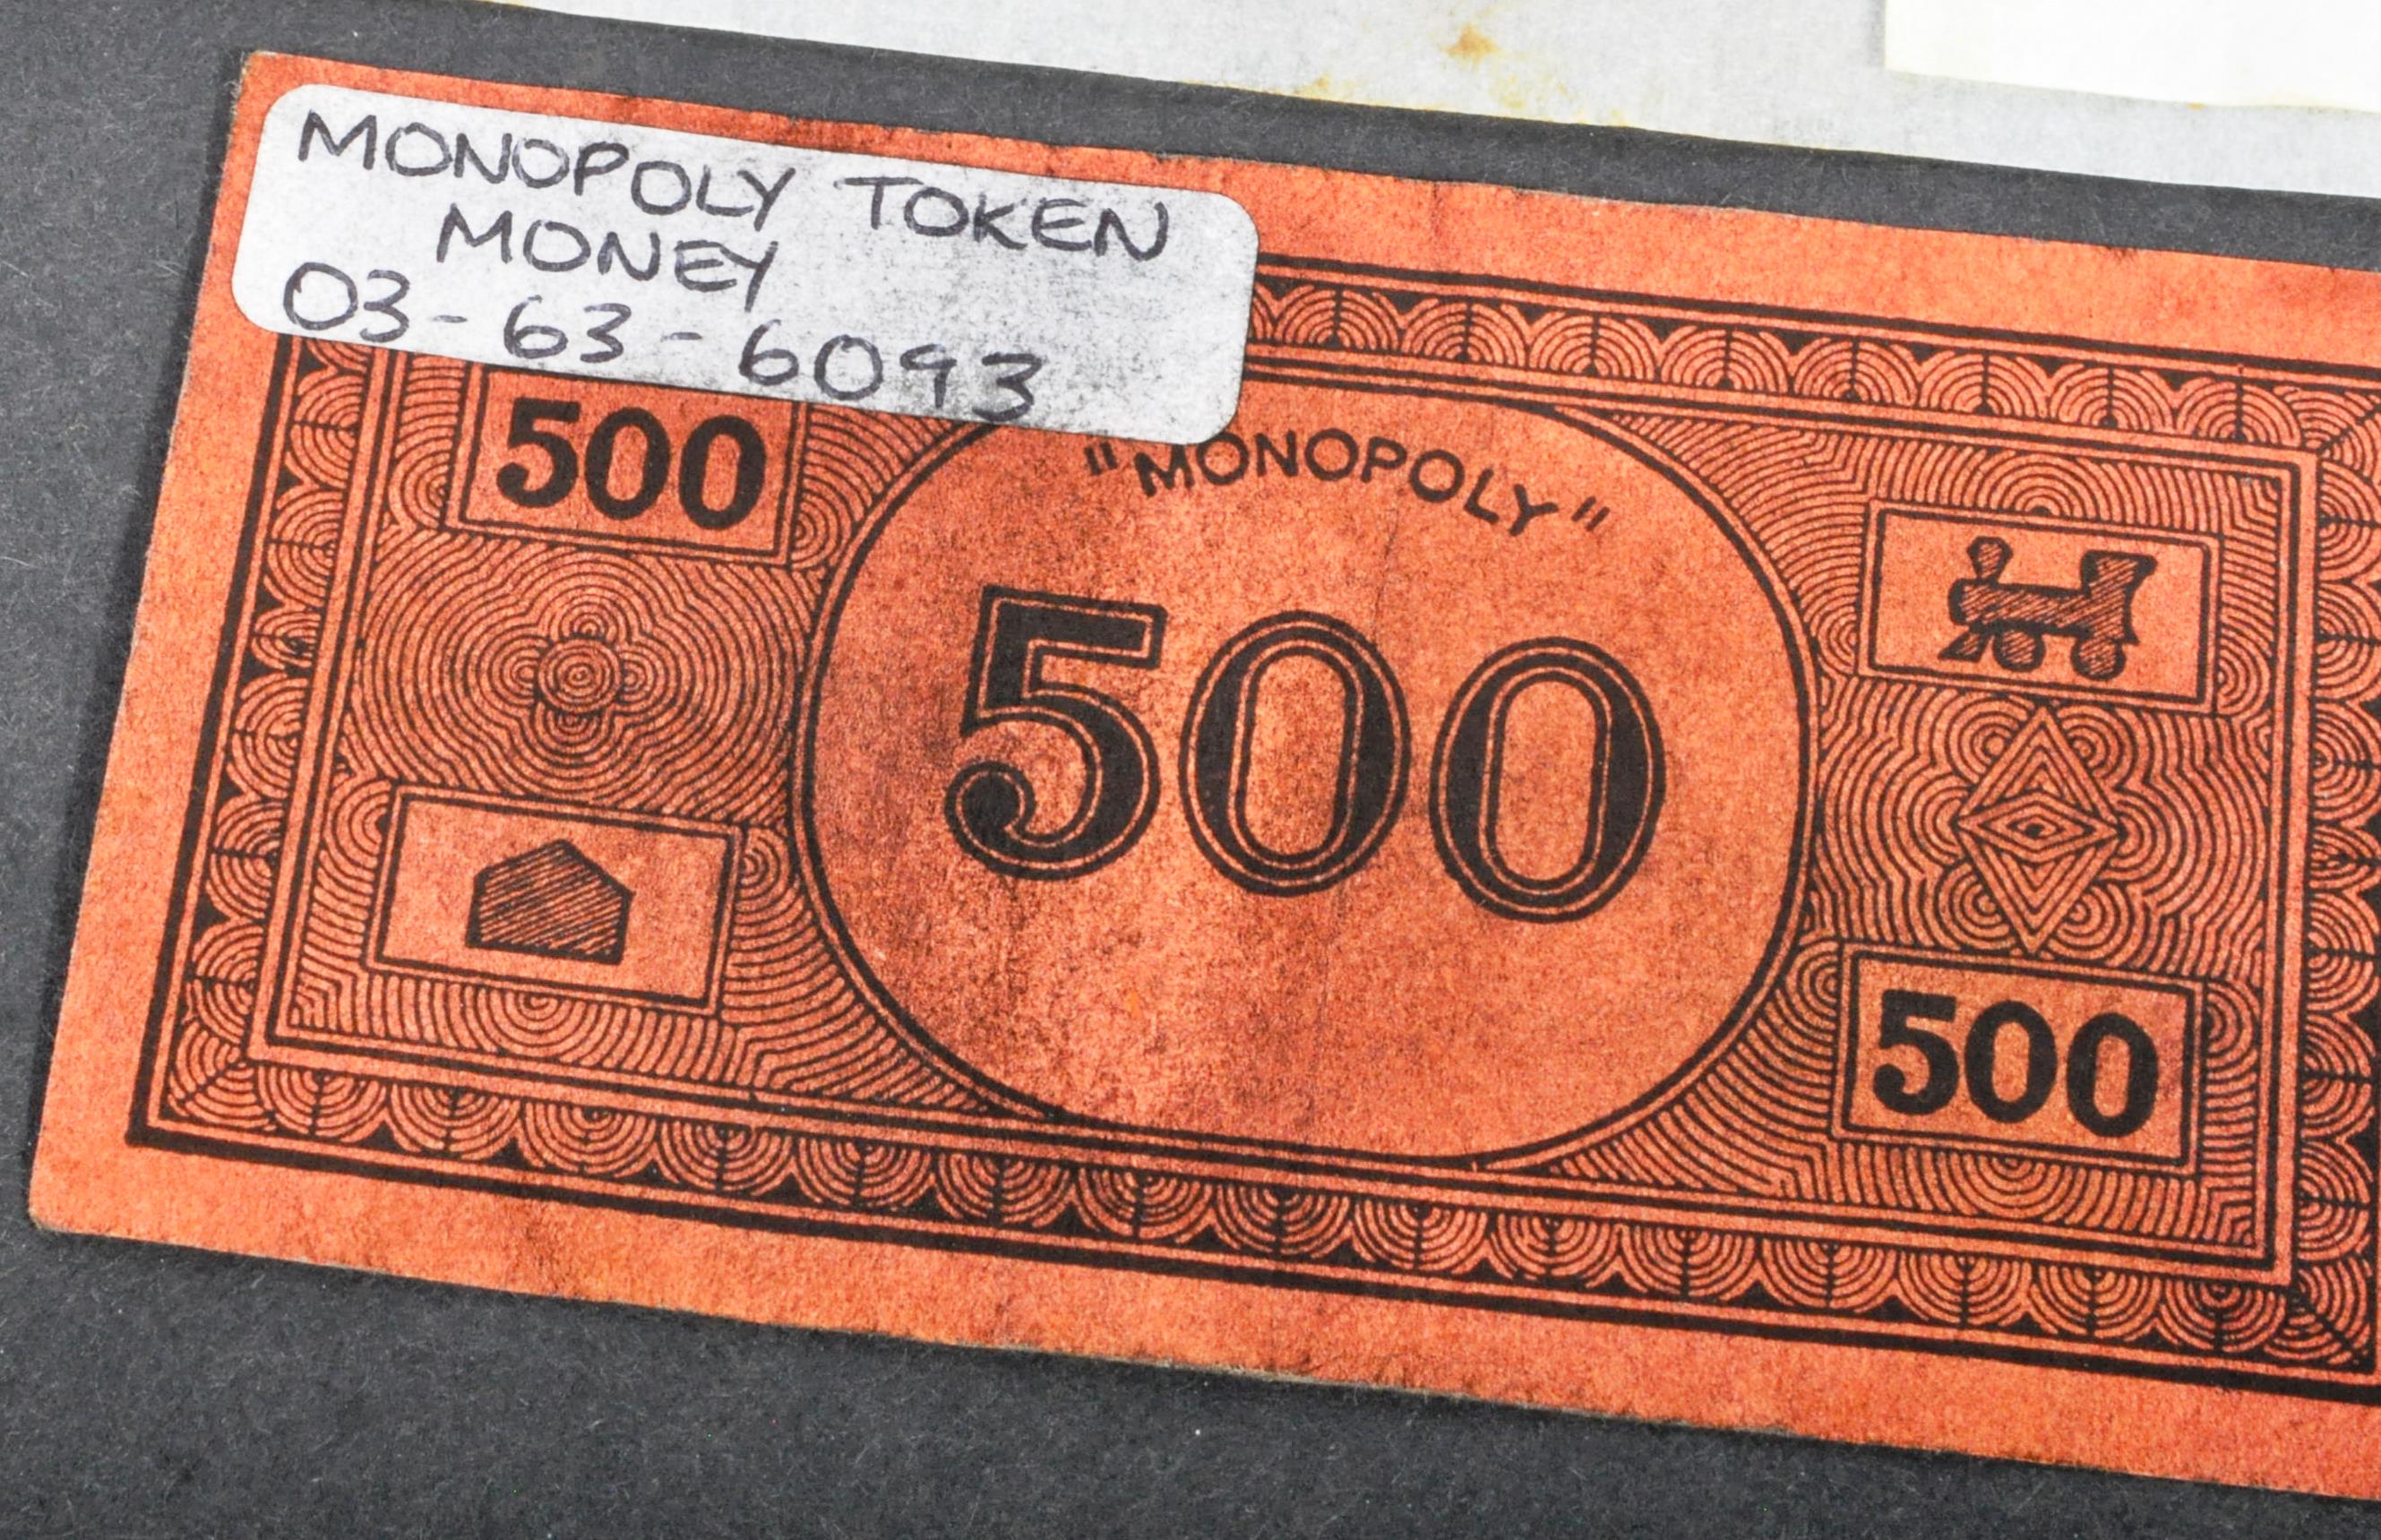 THE GREAT TRAIN ROBBERY - ORIGINAL MONOPOLY 500 MONEY NOTE FROM THE ORIGINAL SET - Image 3 of 4